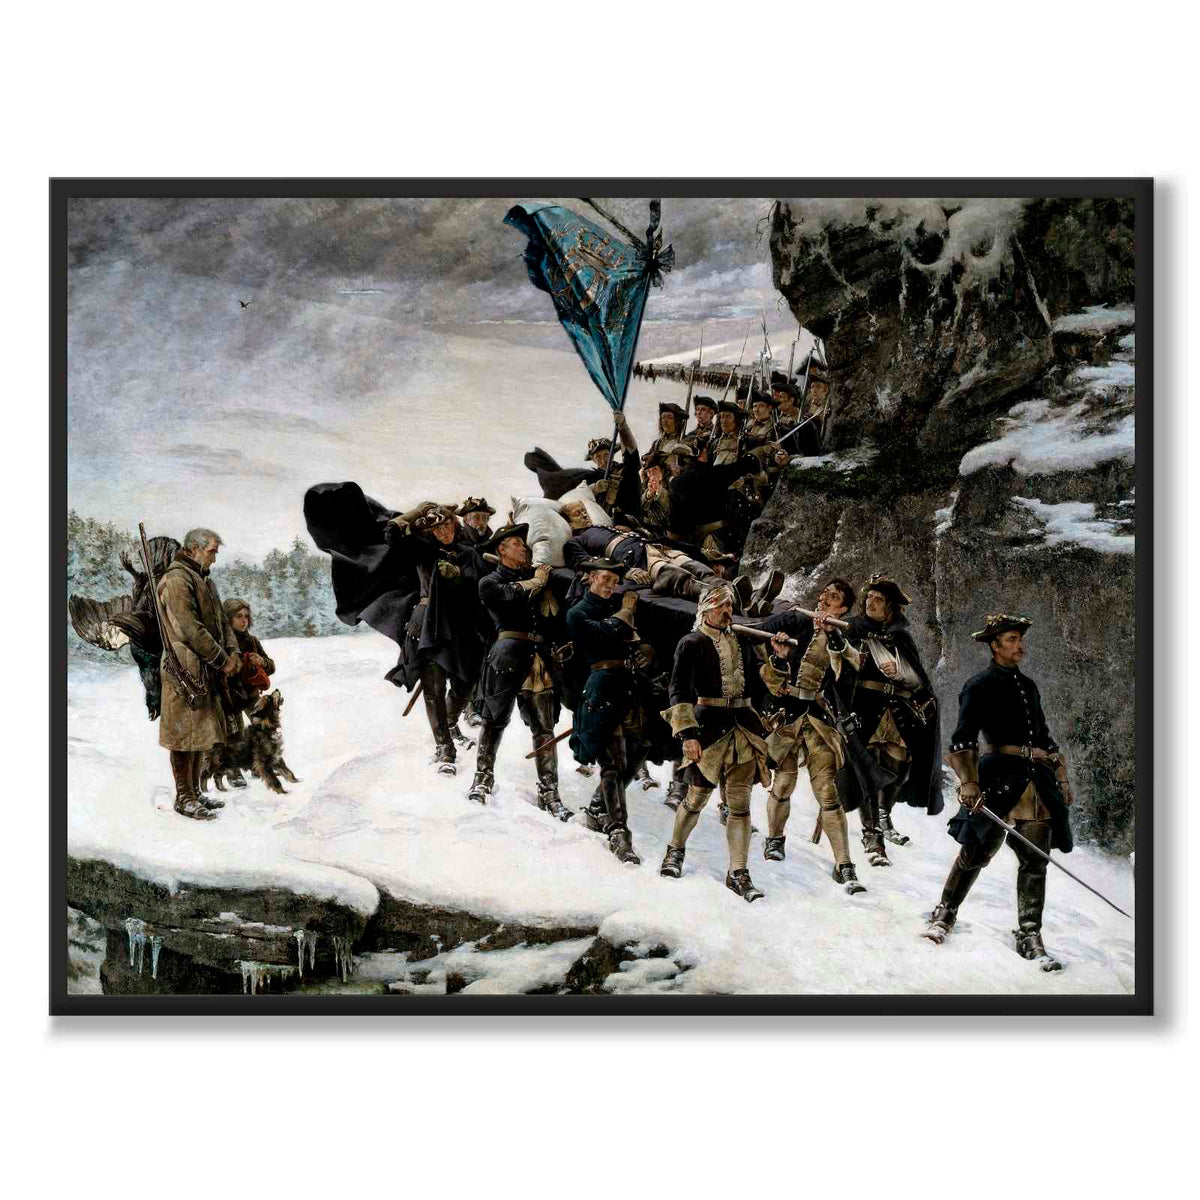 Bringing Home the Body of King Karl XII - Poster